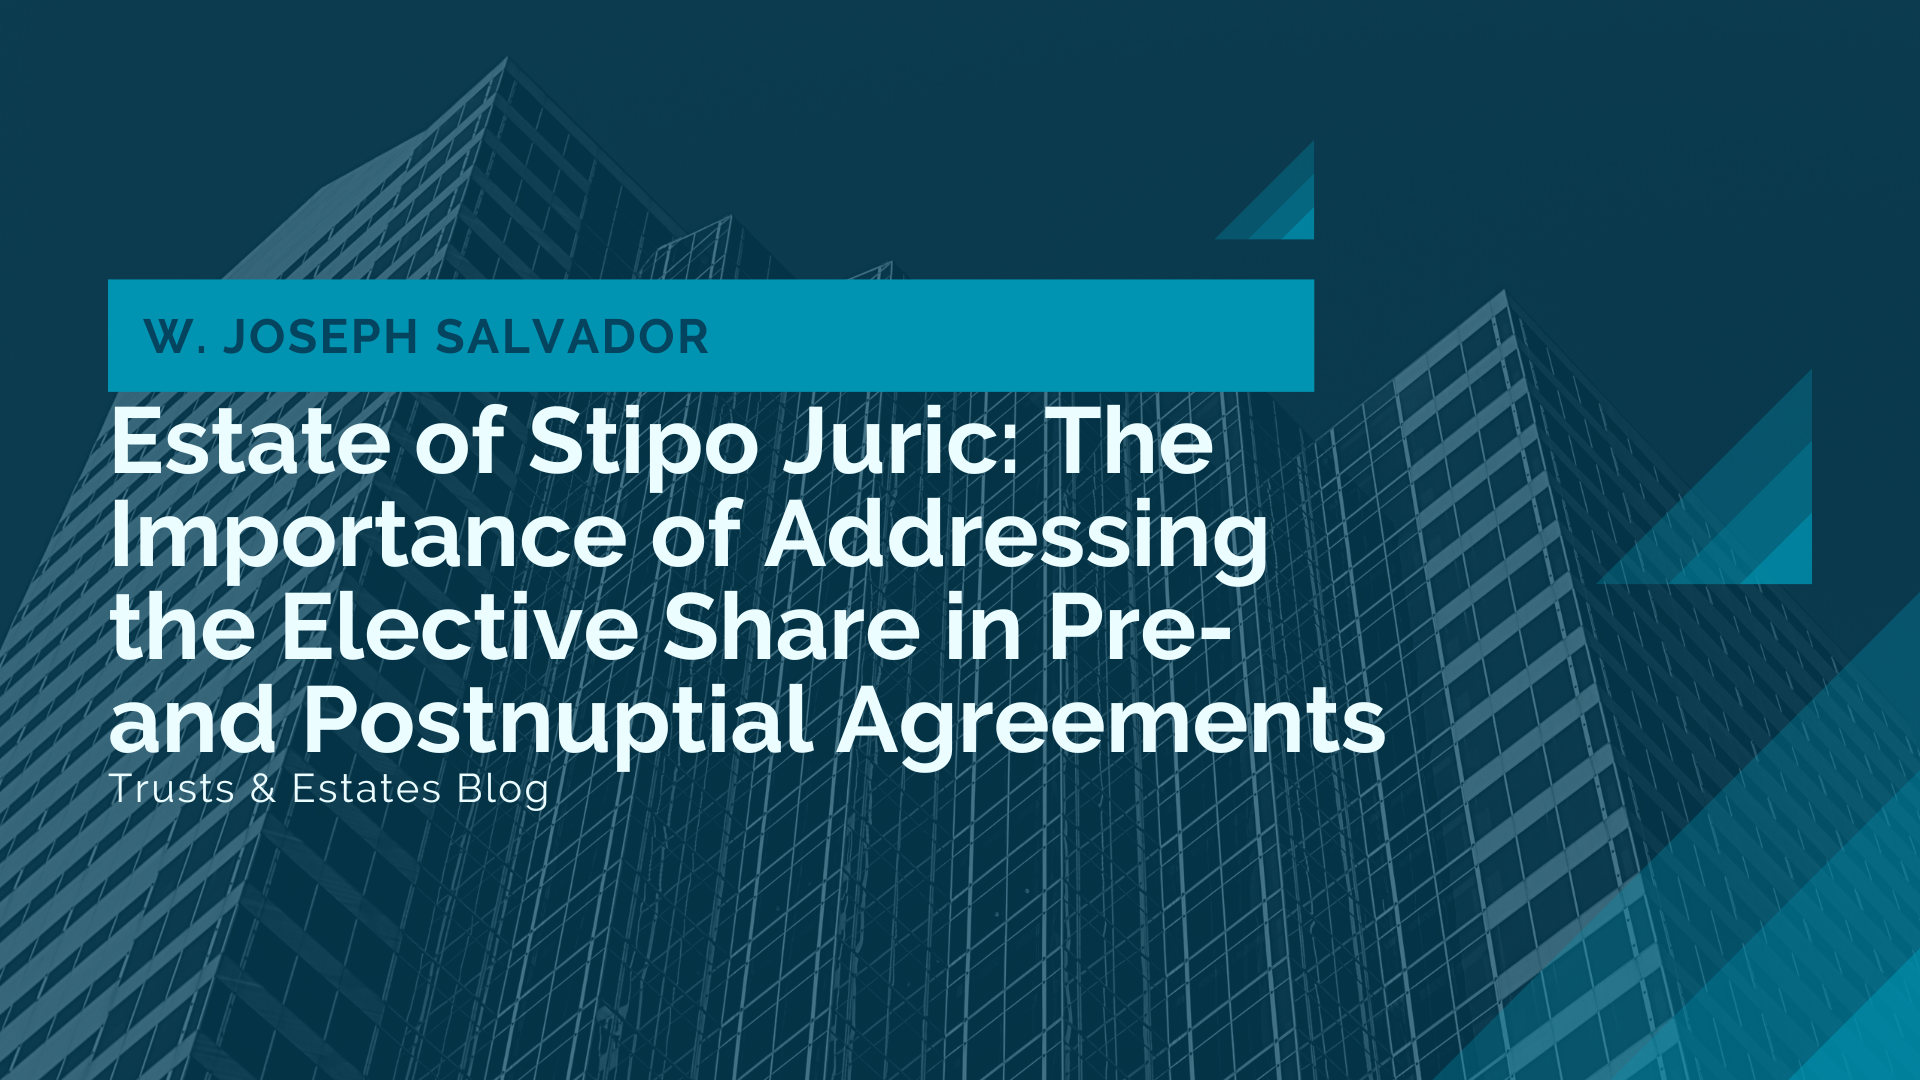 Estate of Stipo Juric: The Importance of Addressing the Elective Share in Prenuptial and Postnuptial Agreements